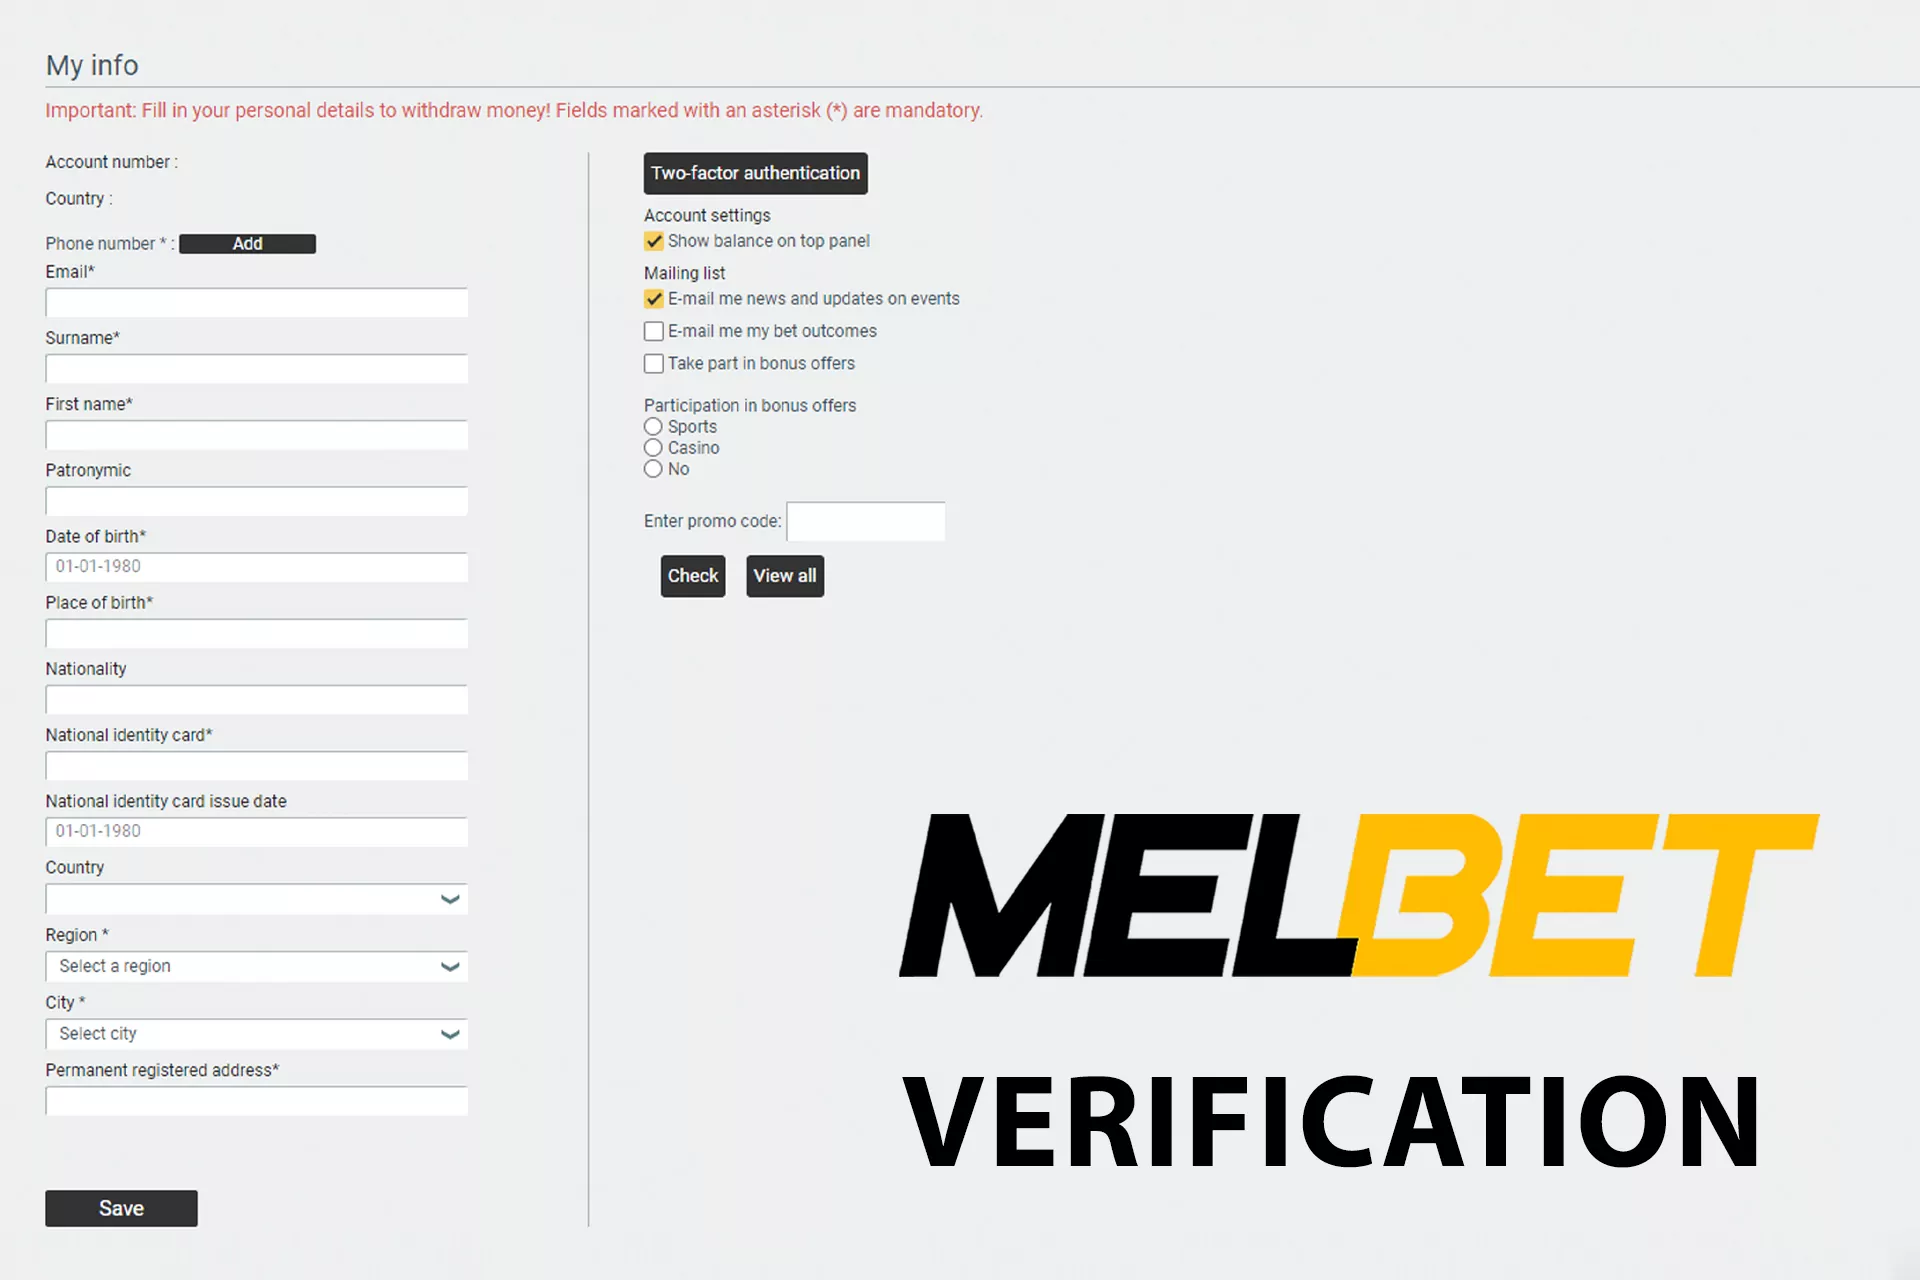 According to Melbet rules, you need to verify your profile to be able to use all the possibilities of Melbet.